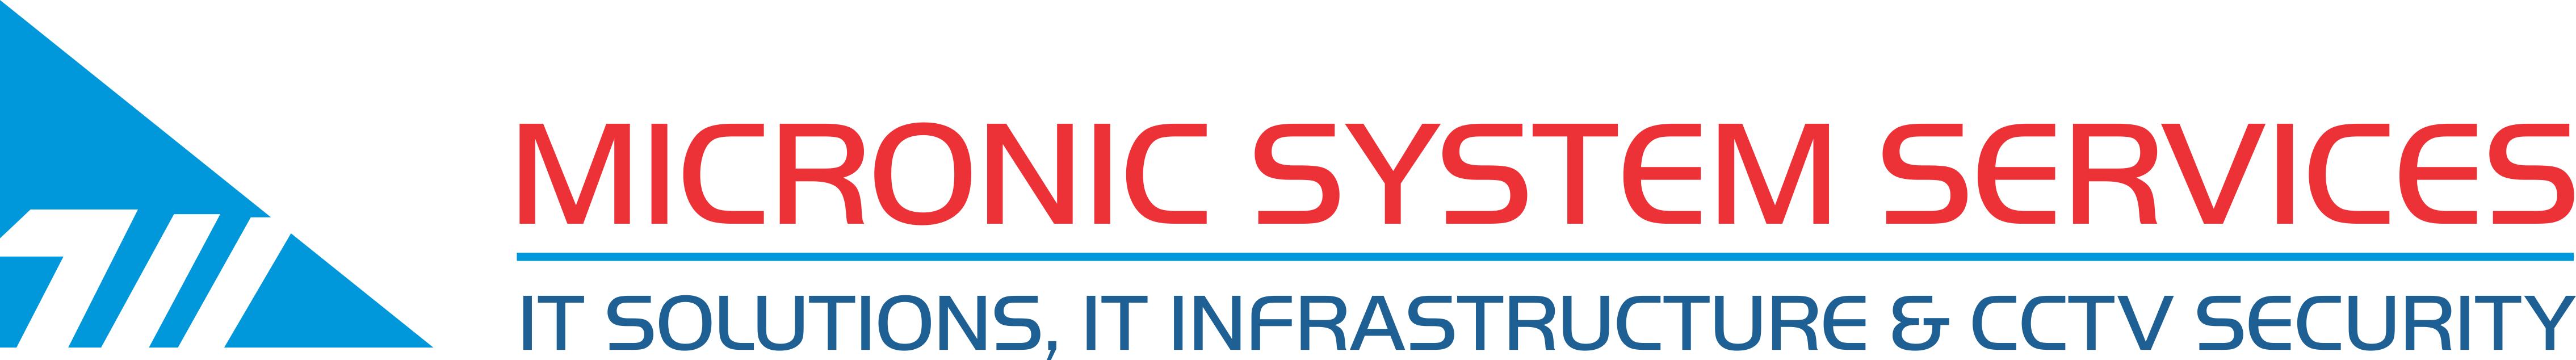 Micronic Systems Services